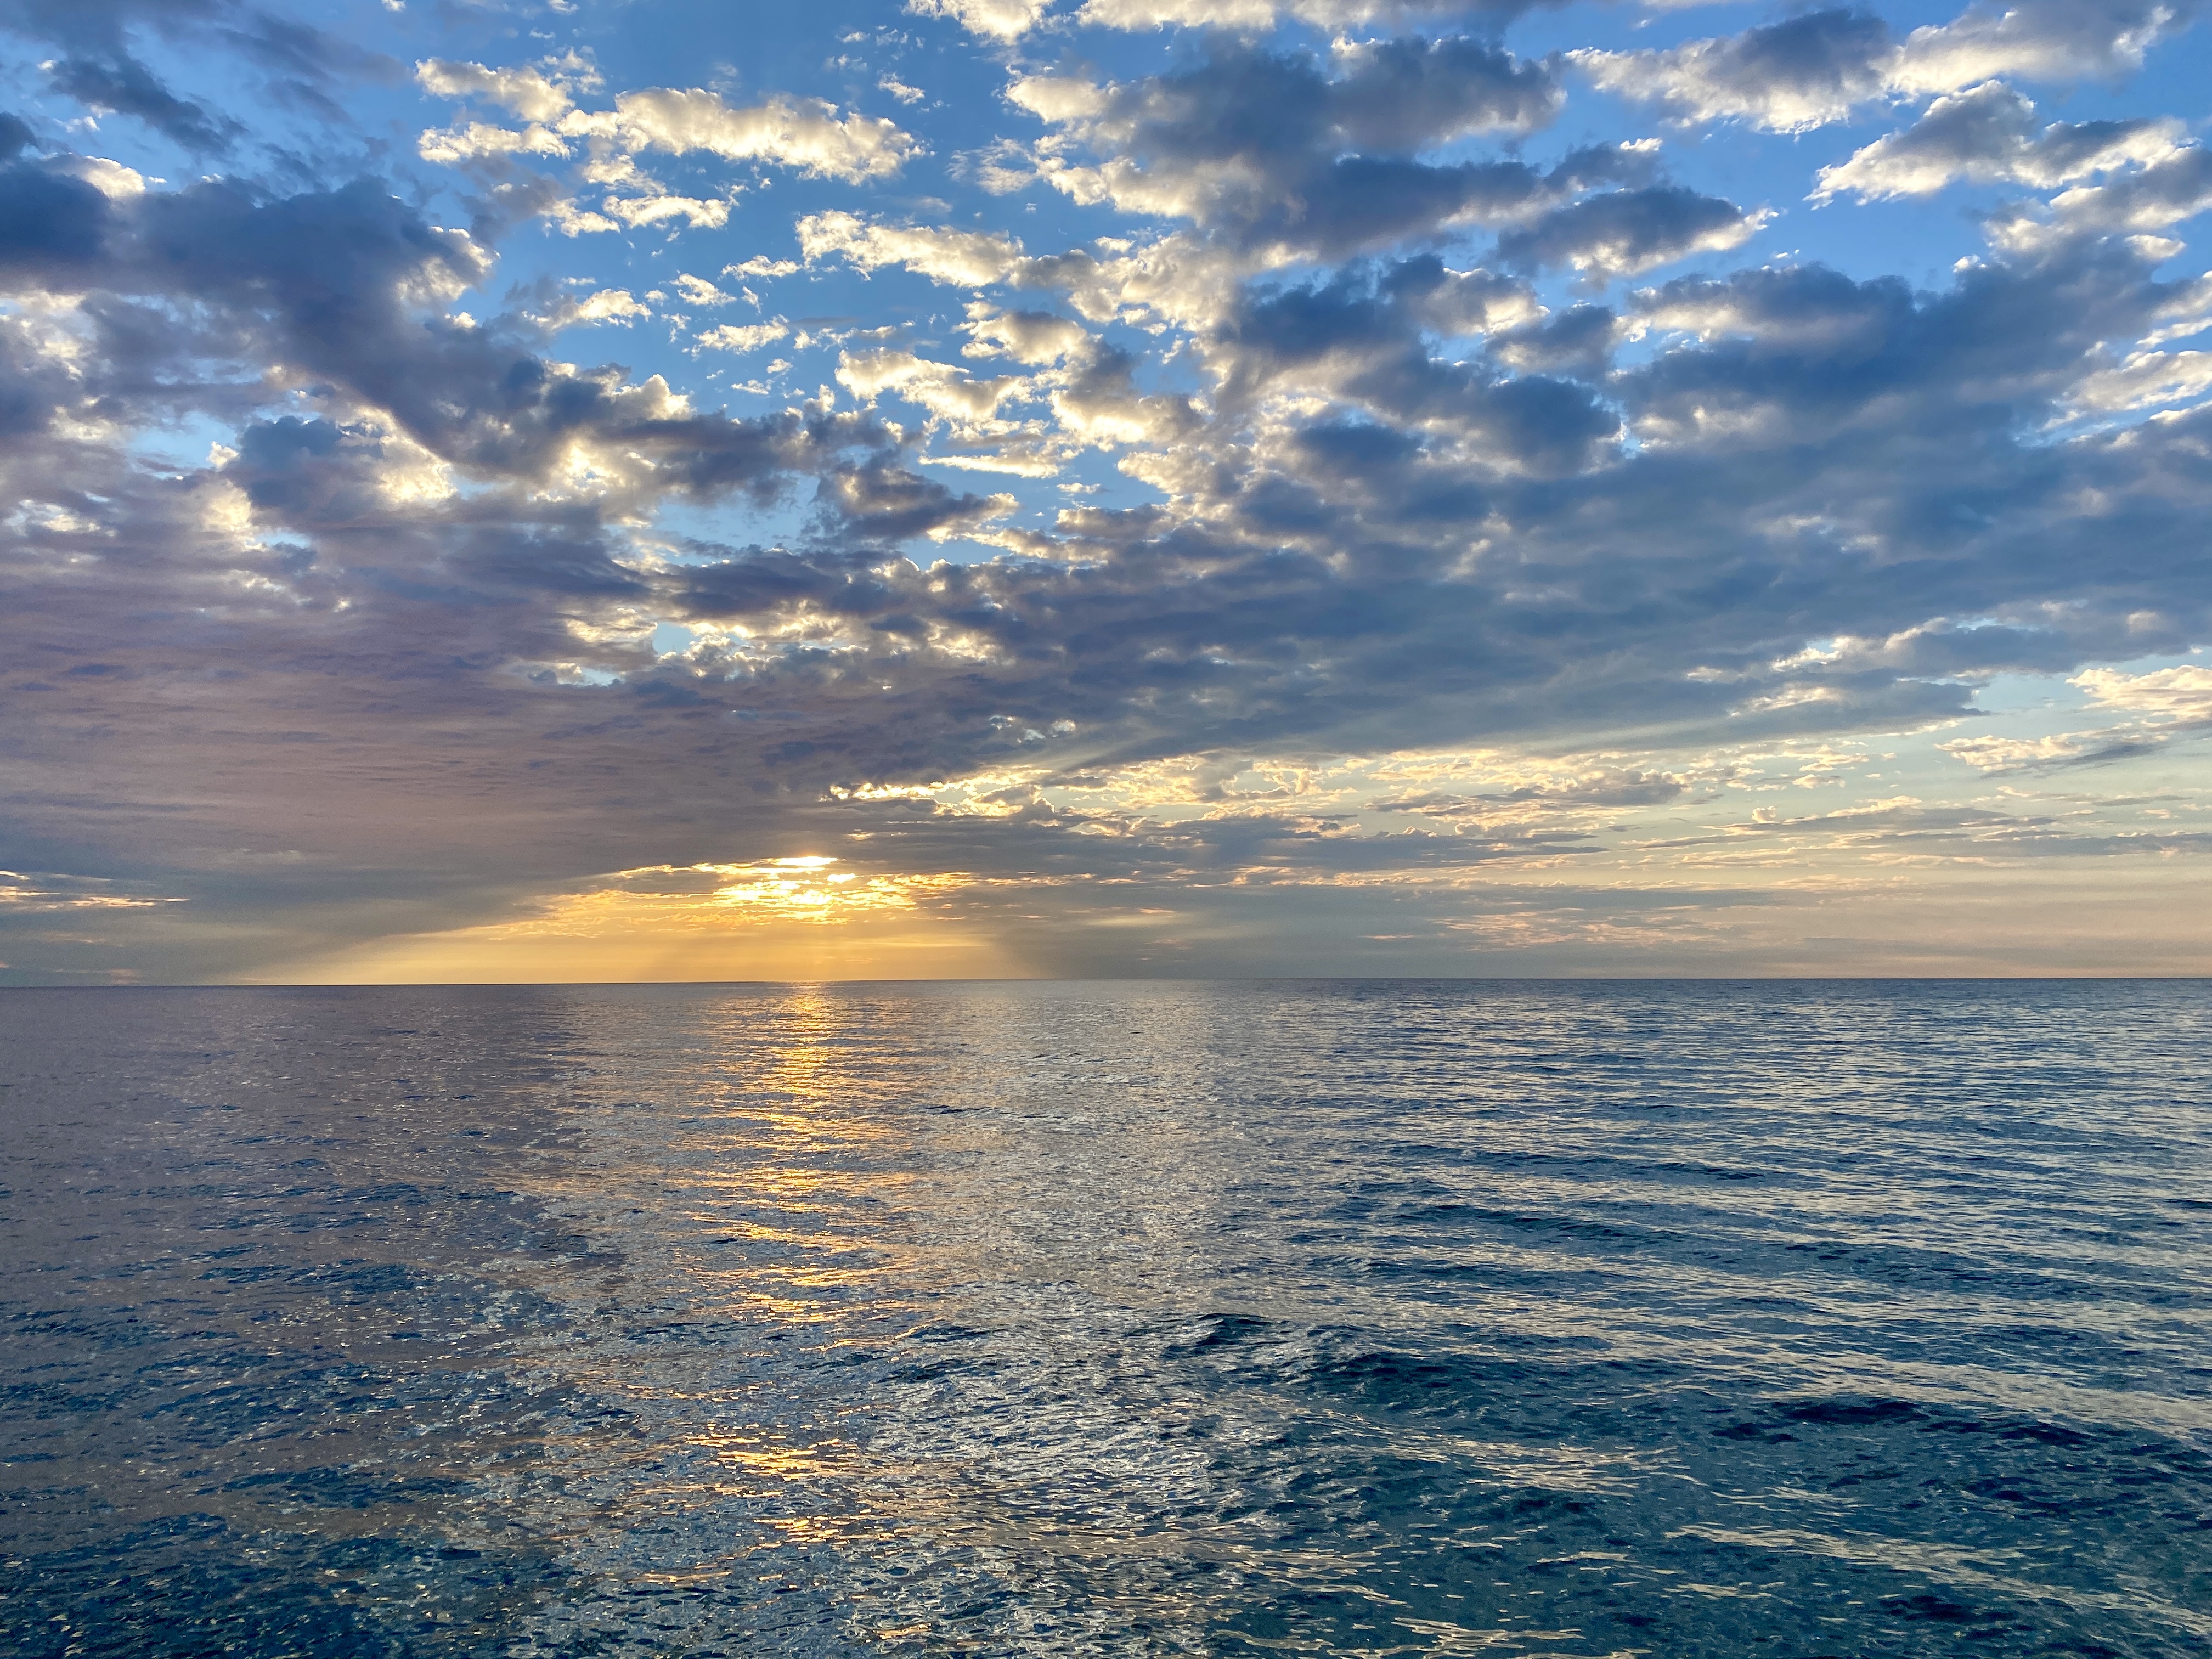 A lake horizon with an orange sunrise peeking through a blue sky swept with clouds, the water surface dark blue and calm